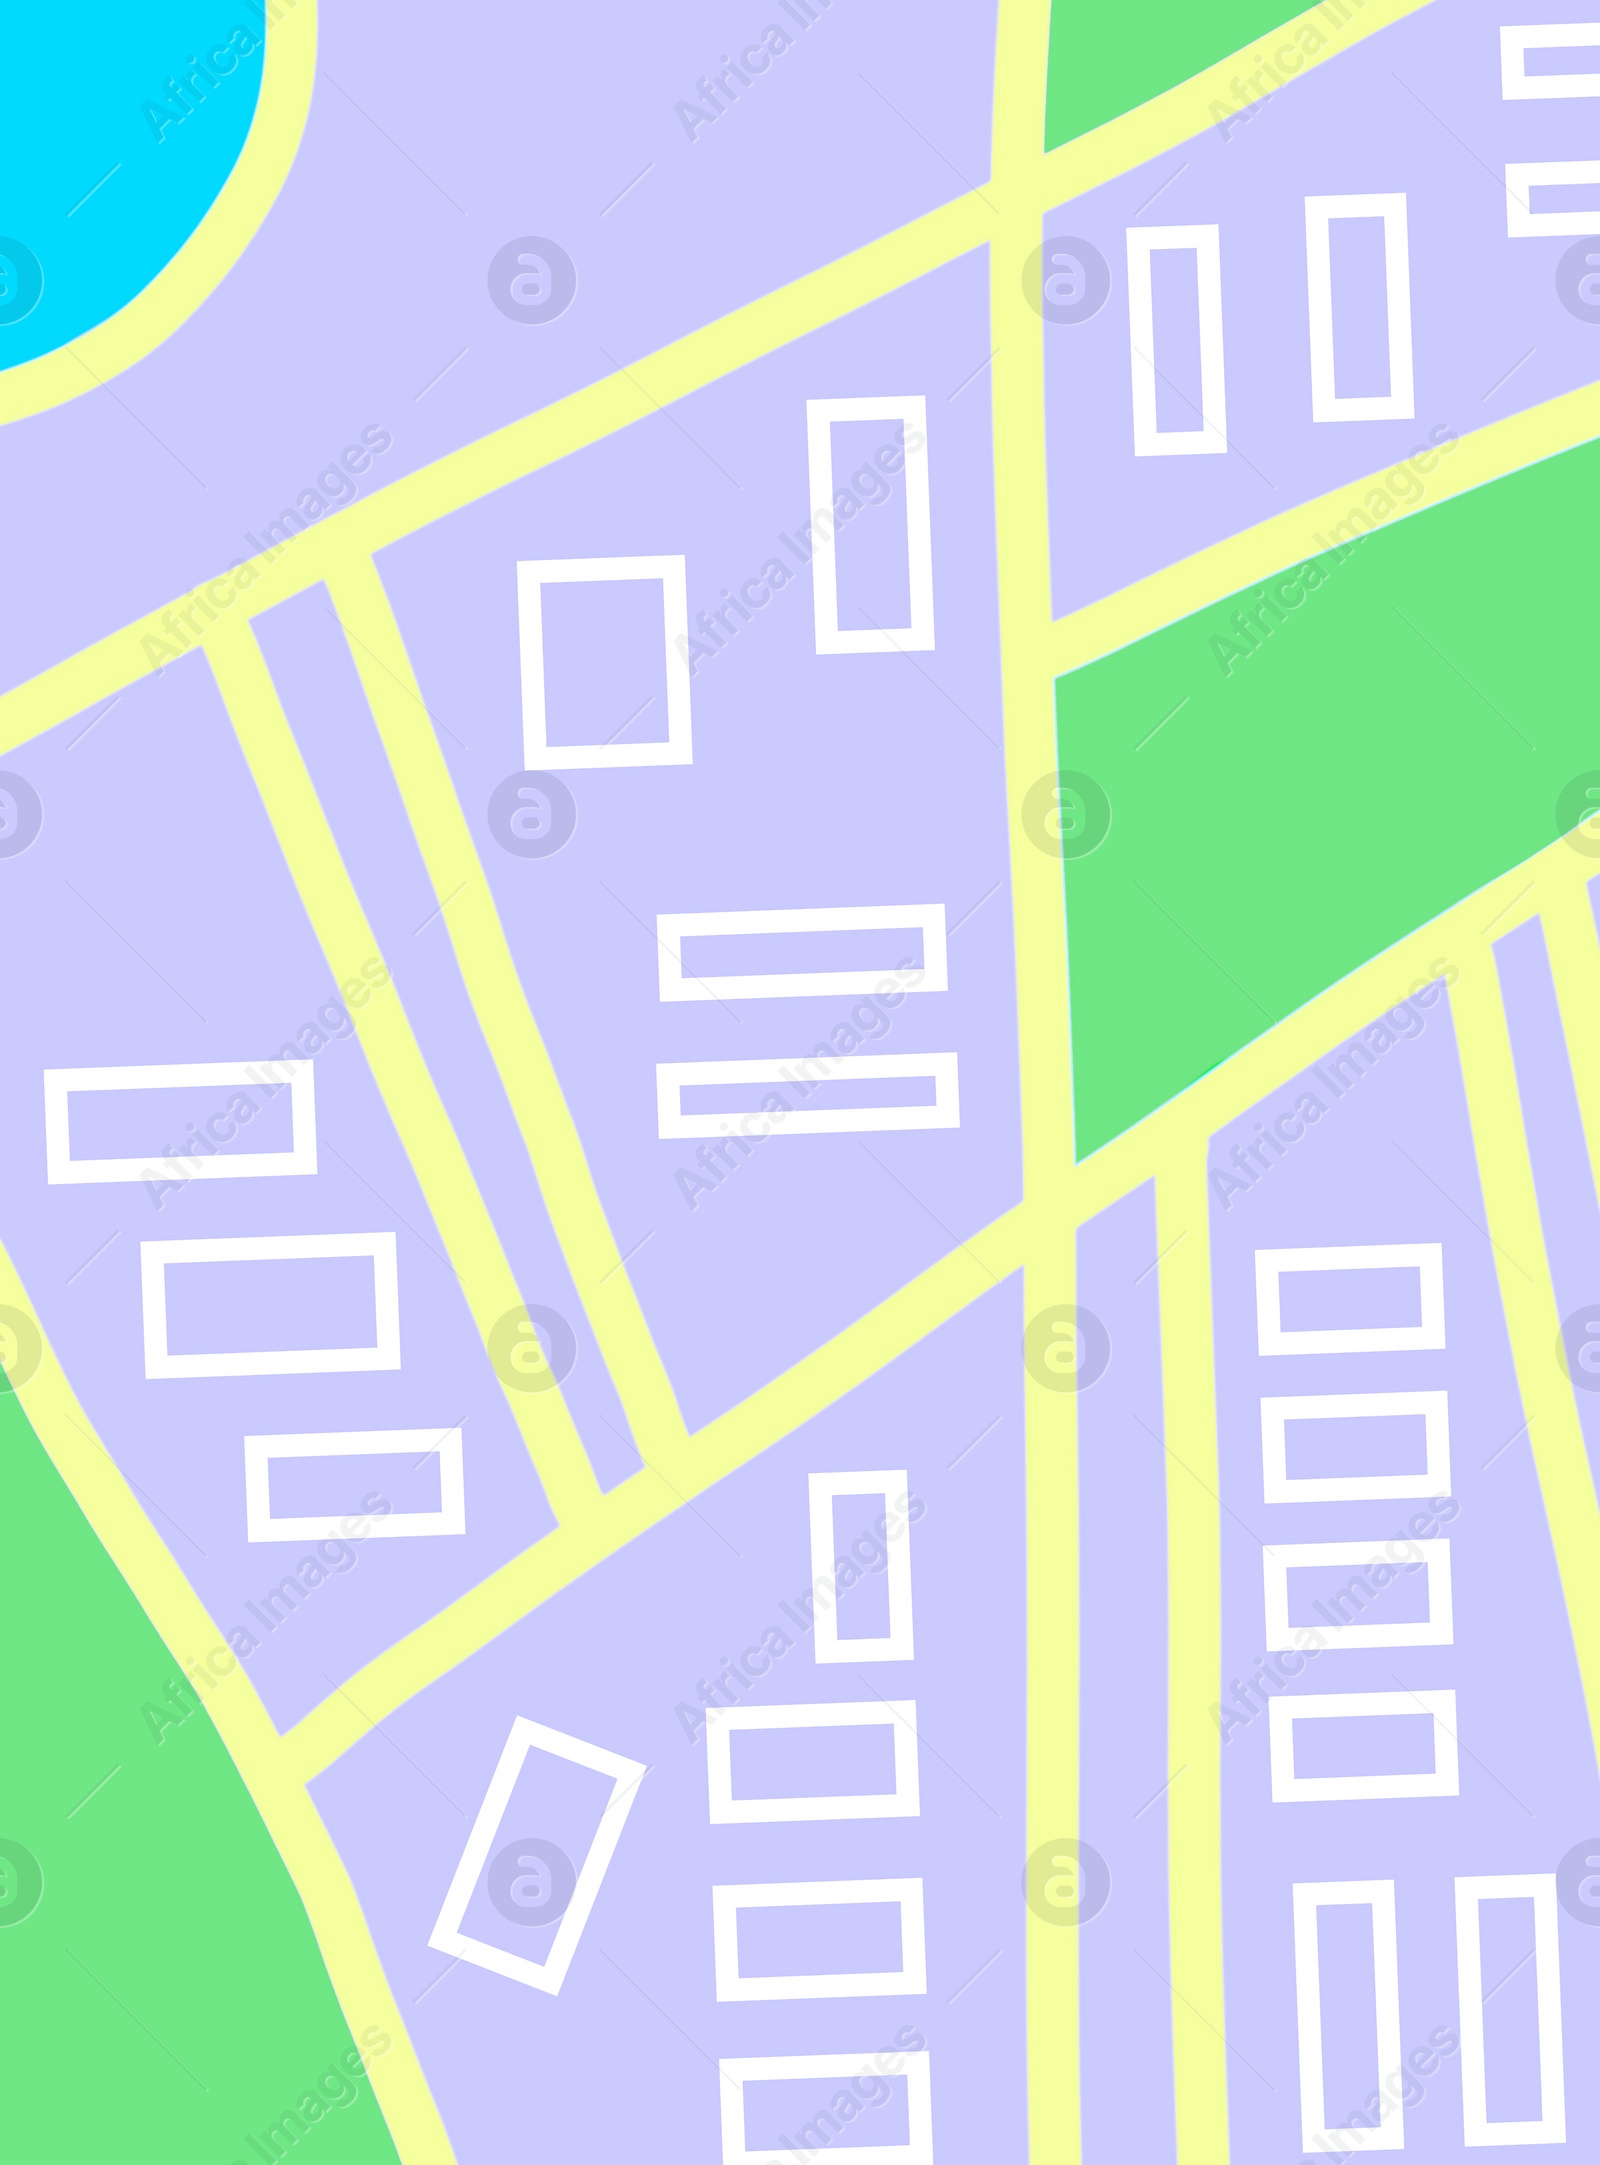 Illustration of  city map. Search best route